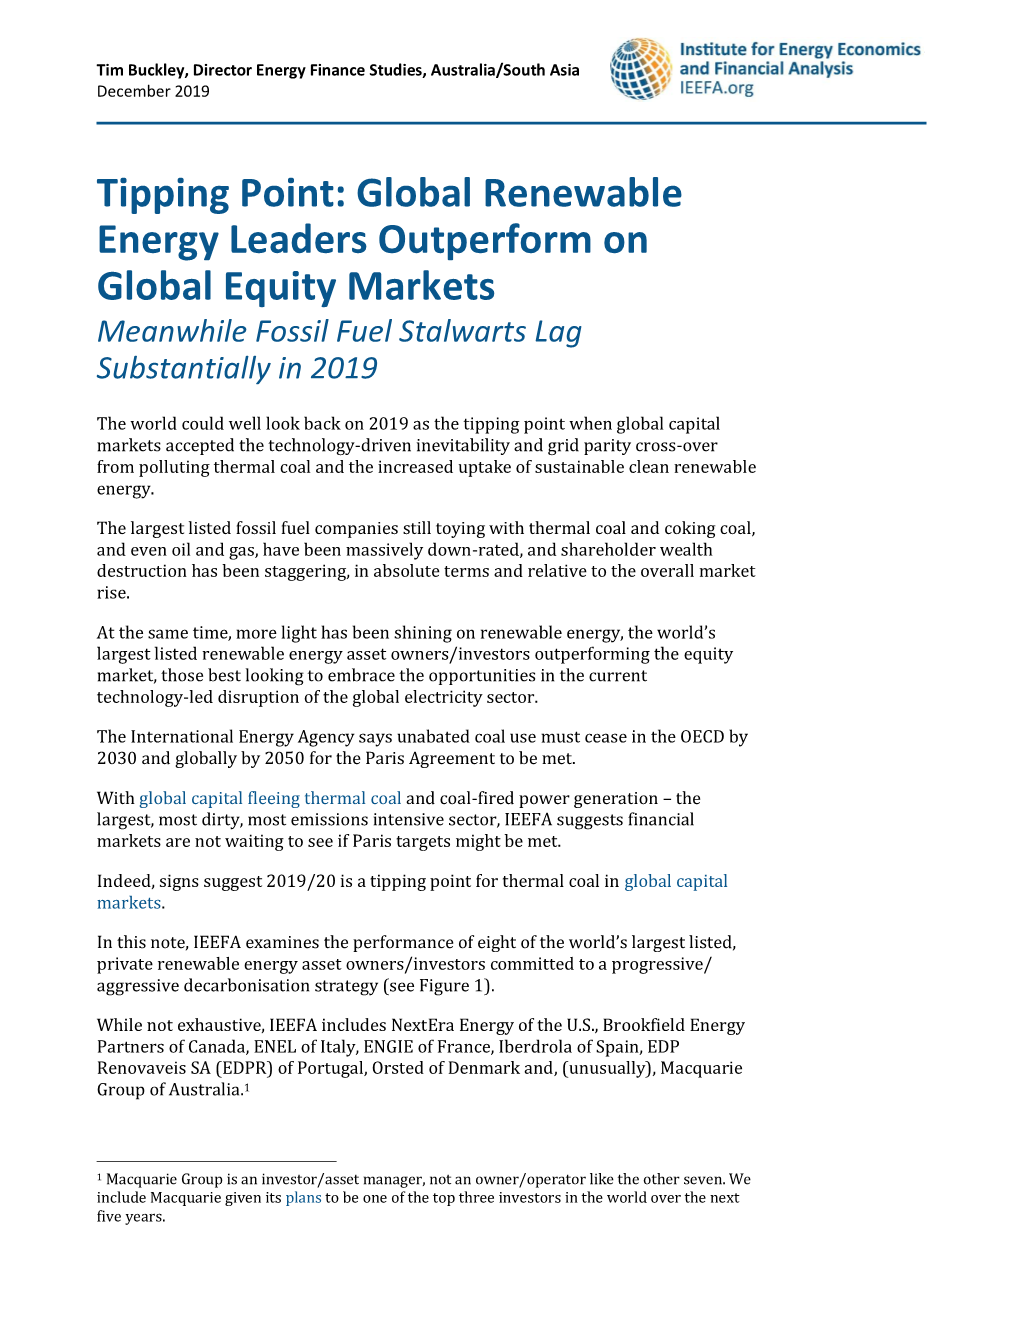 Tipping Point: Global Renewable Energy Leaders Outperform on Global Equity Markets Meanwhile Fossil Fuel Stalwarts Lag Substantially in 2019